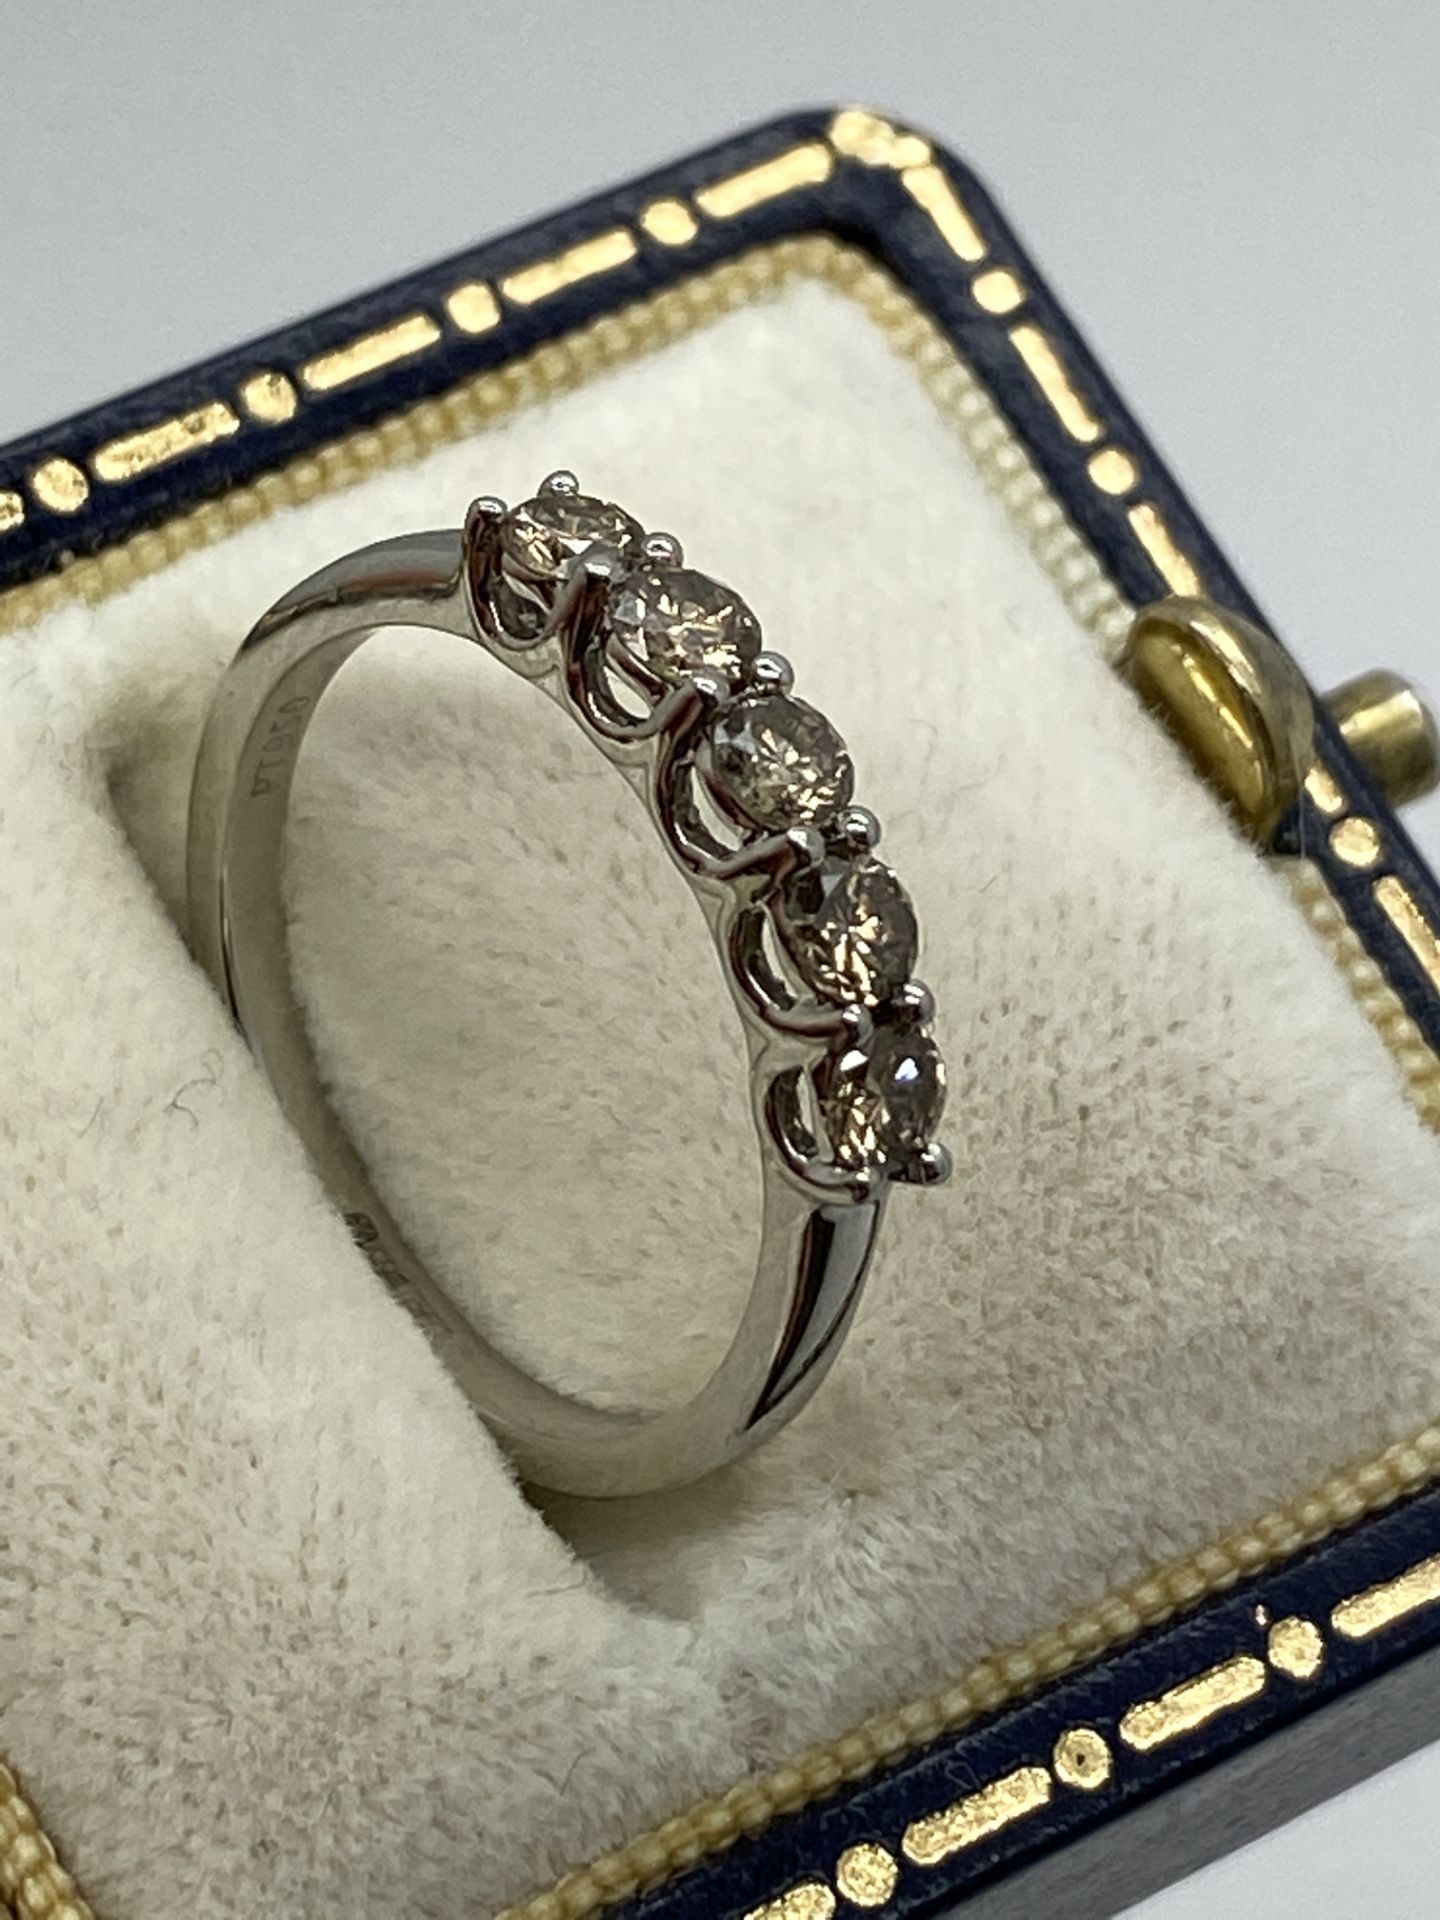 950 PLATINUM 5 STONE COGNAC DIAMOND RING - APPROX. RING SIZE L - Image 10 of 12